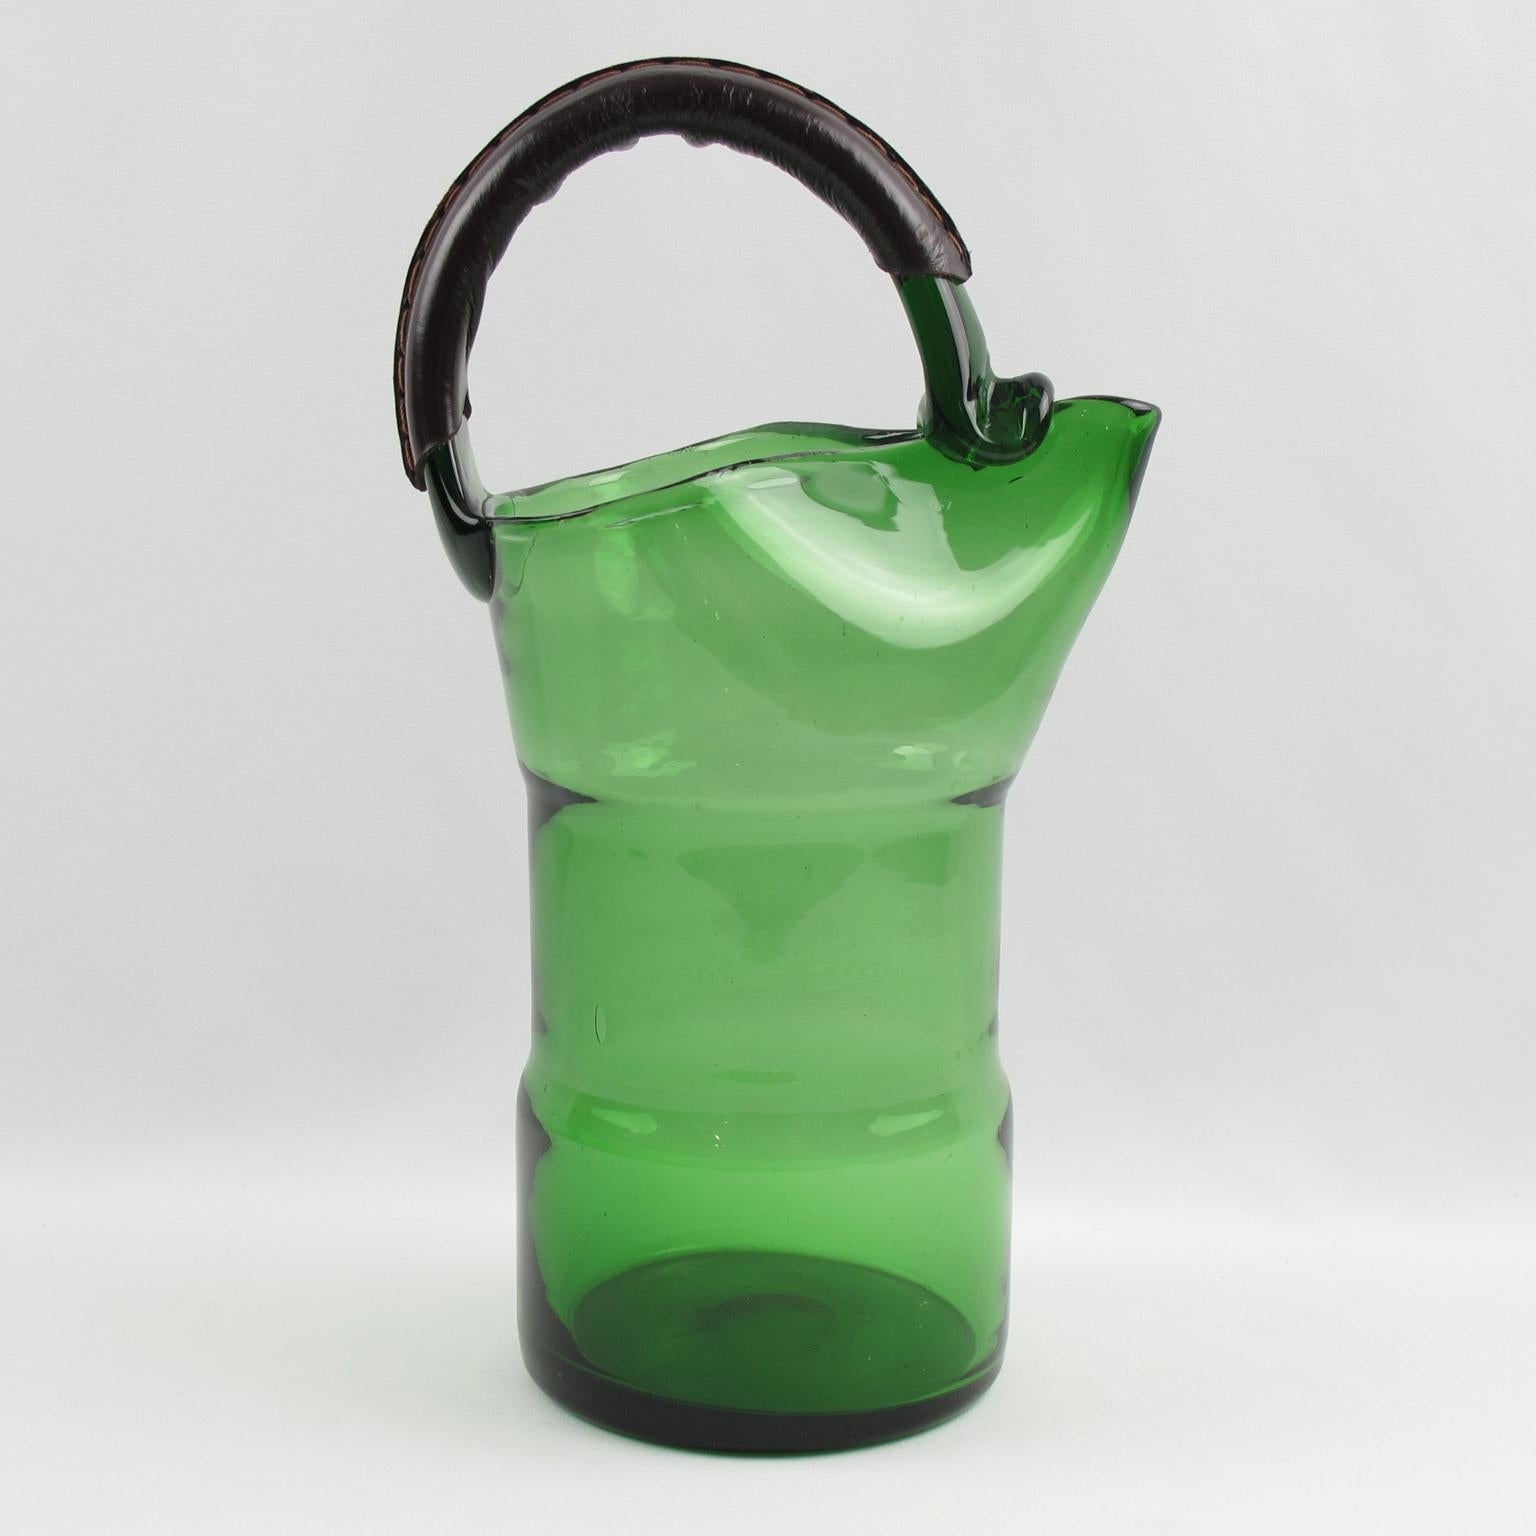 Stunning 1960s modernist Italian mouth-blown glass pitcher. Perfect for barware use and to serve lemonade or water, this lovely green glass pitcher is accented with a very unusual dark brown hand-stitched leather handle. Polished pontil mark on the